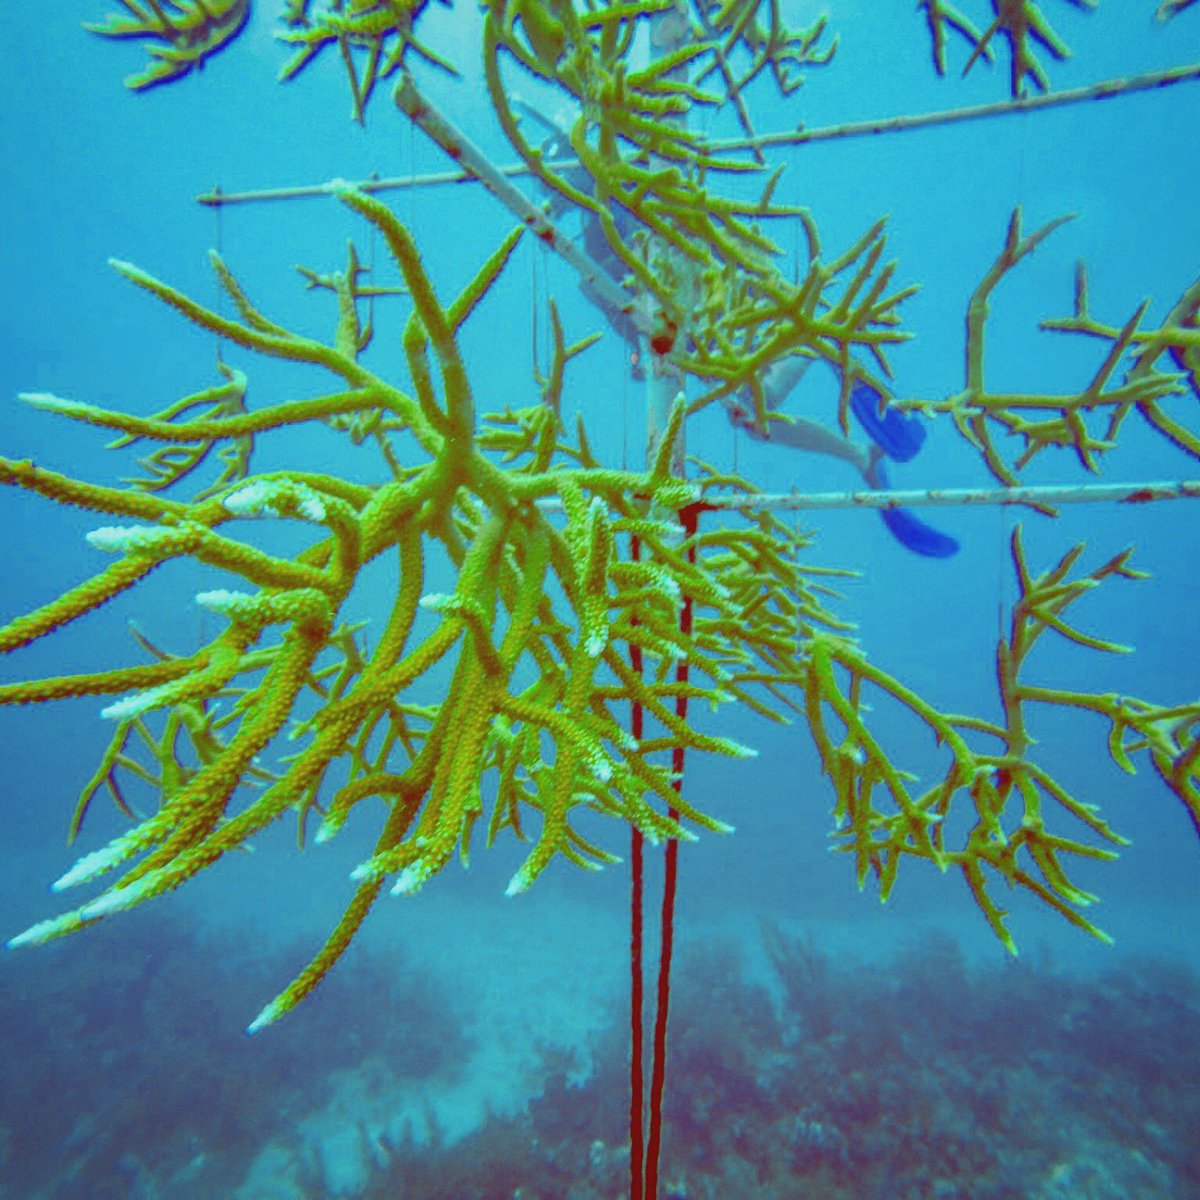 The coral nurseries are getting big! We will start out planting these “little” guys back onto the reef soon
#eco #savereef #coral #coralreef #savethereef #savetheocean #savetheplanet #ocean #diving #padi #projectaware #coralconservation #ecodivers #cayman #islandlife #blueplanet